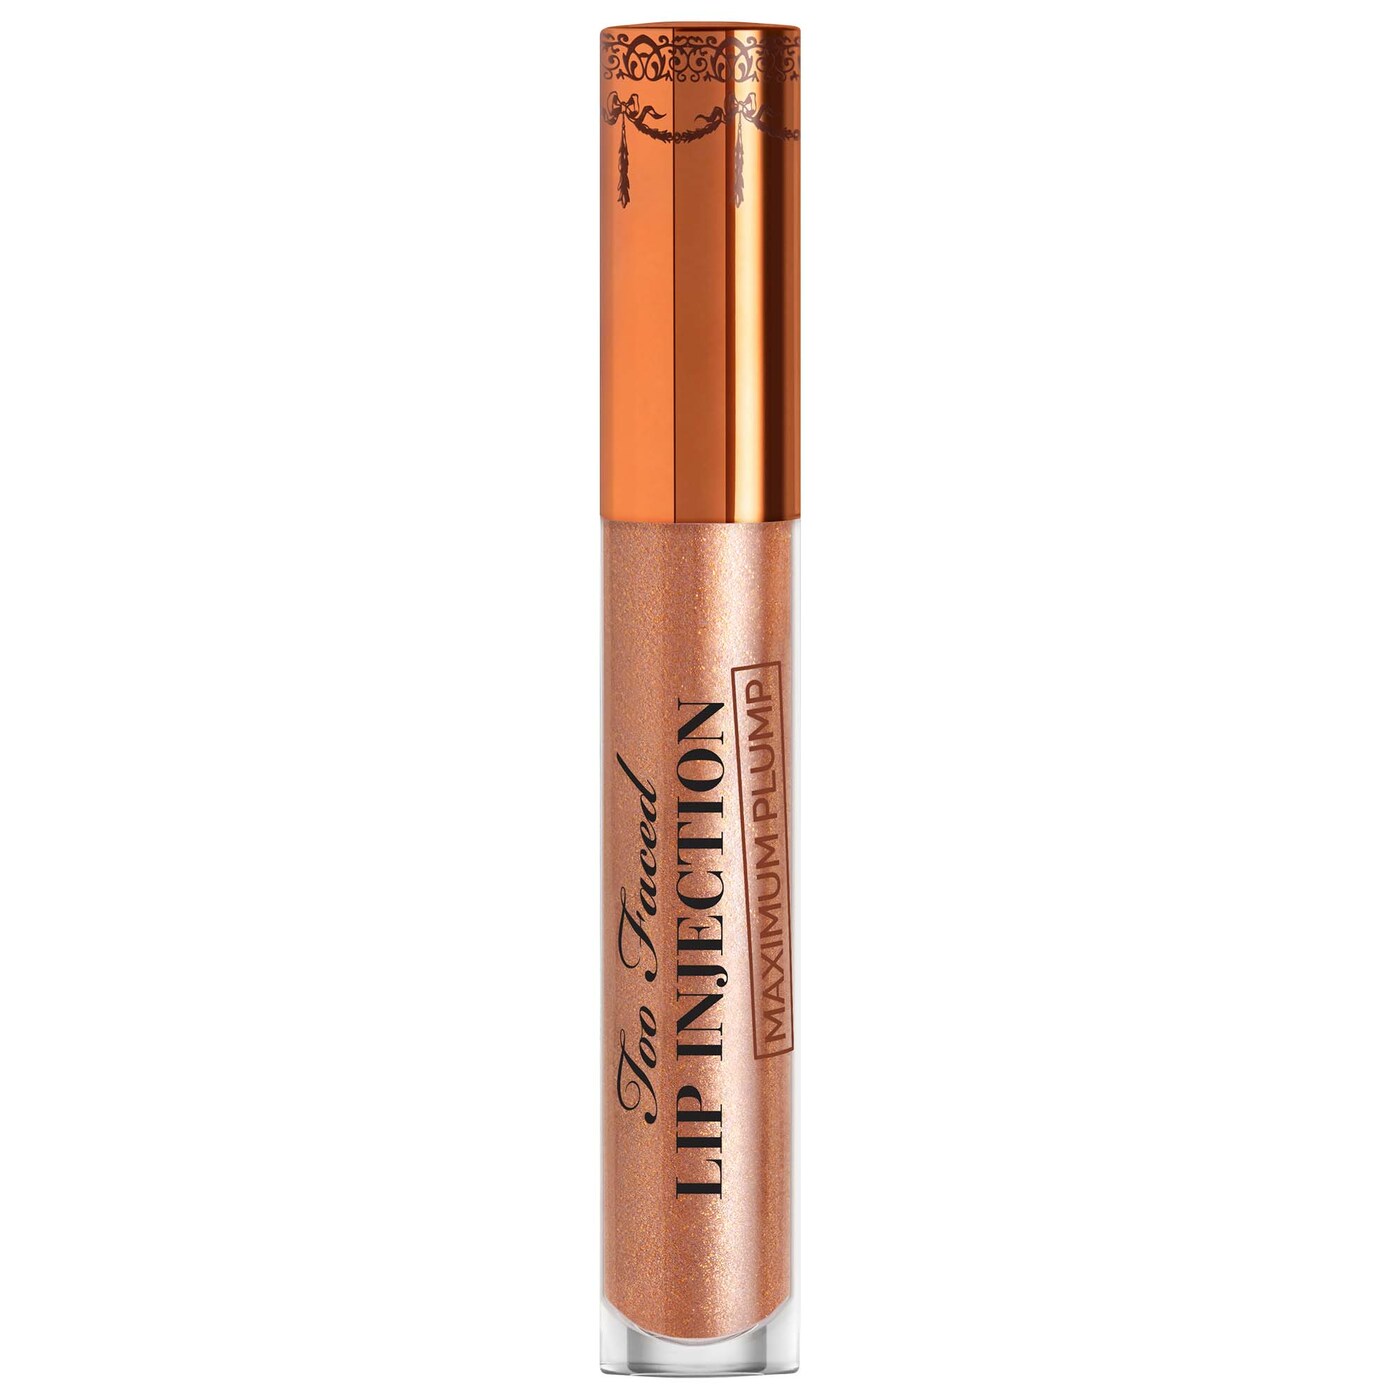 Too Faced - Lip Injection Maximum Plump Extra Strength Hydrating Lip Plumper